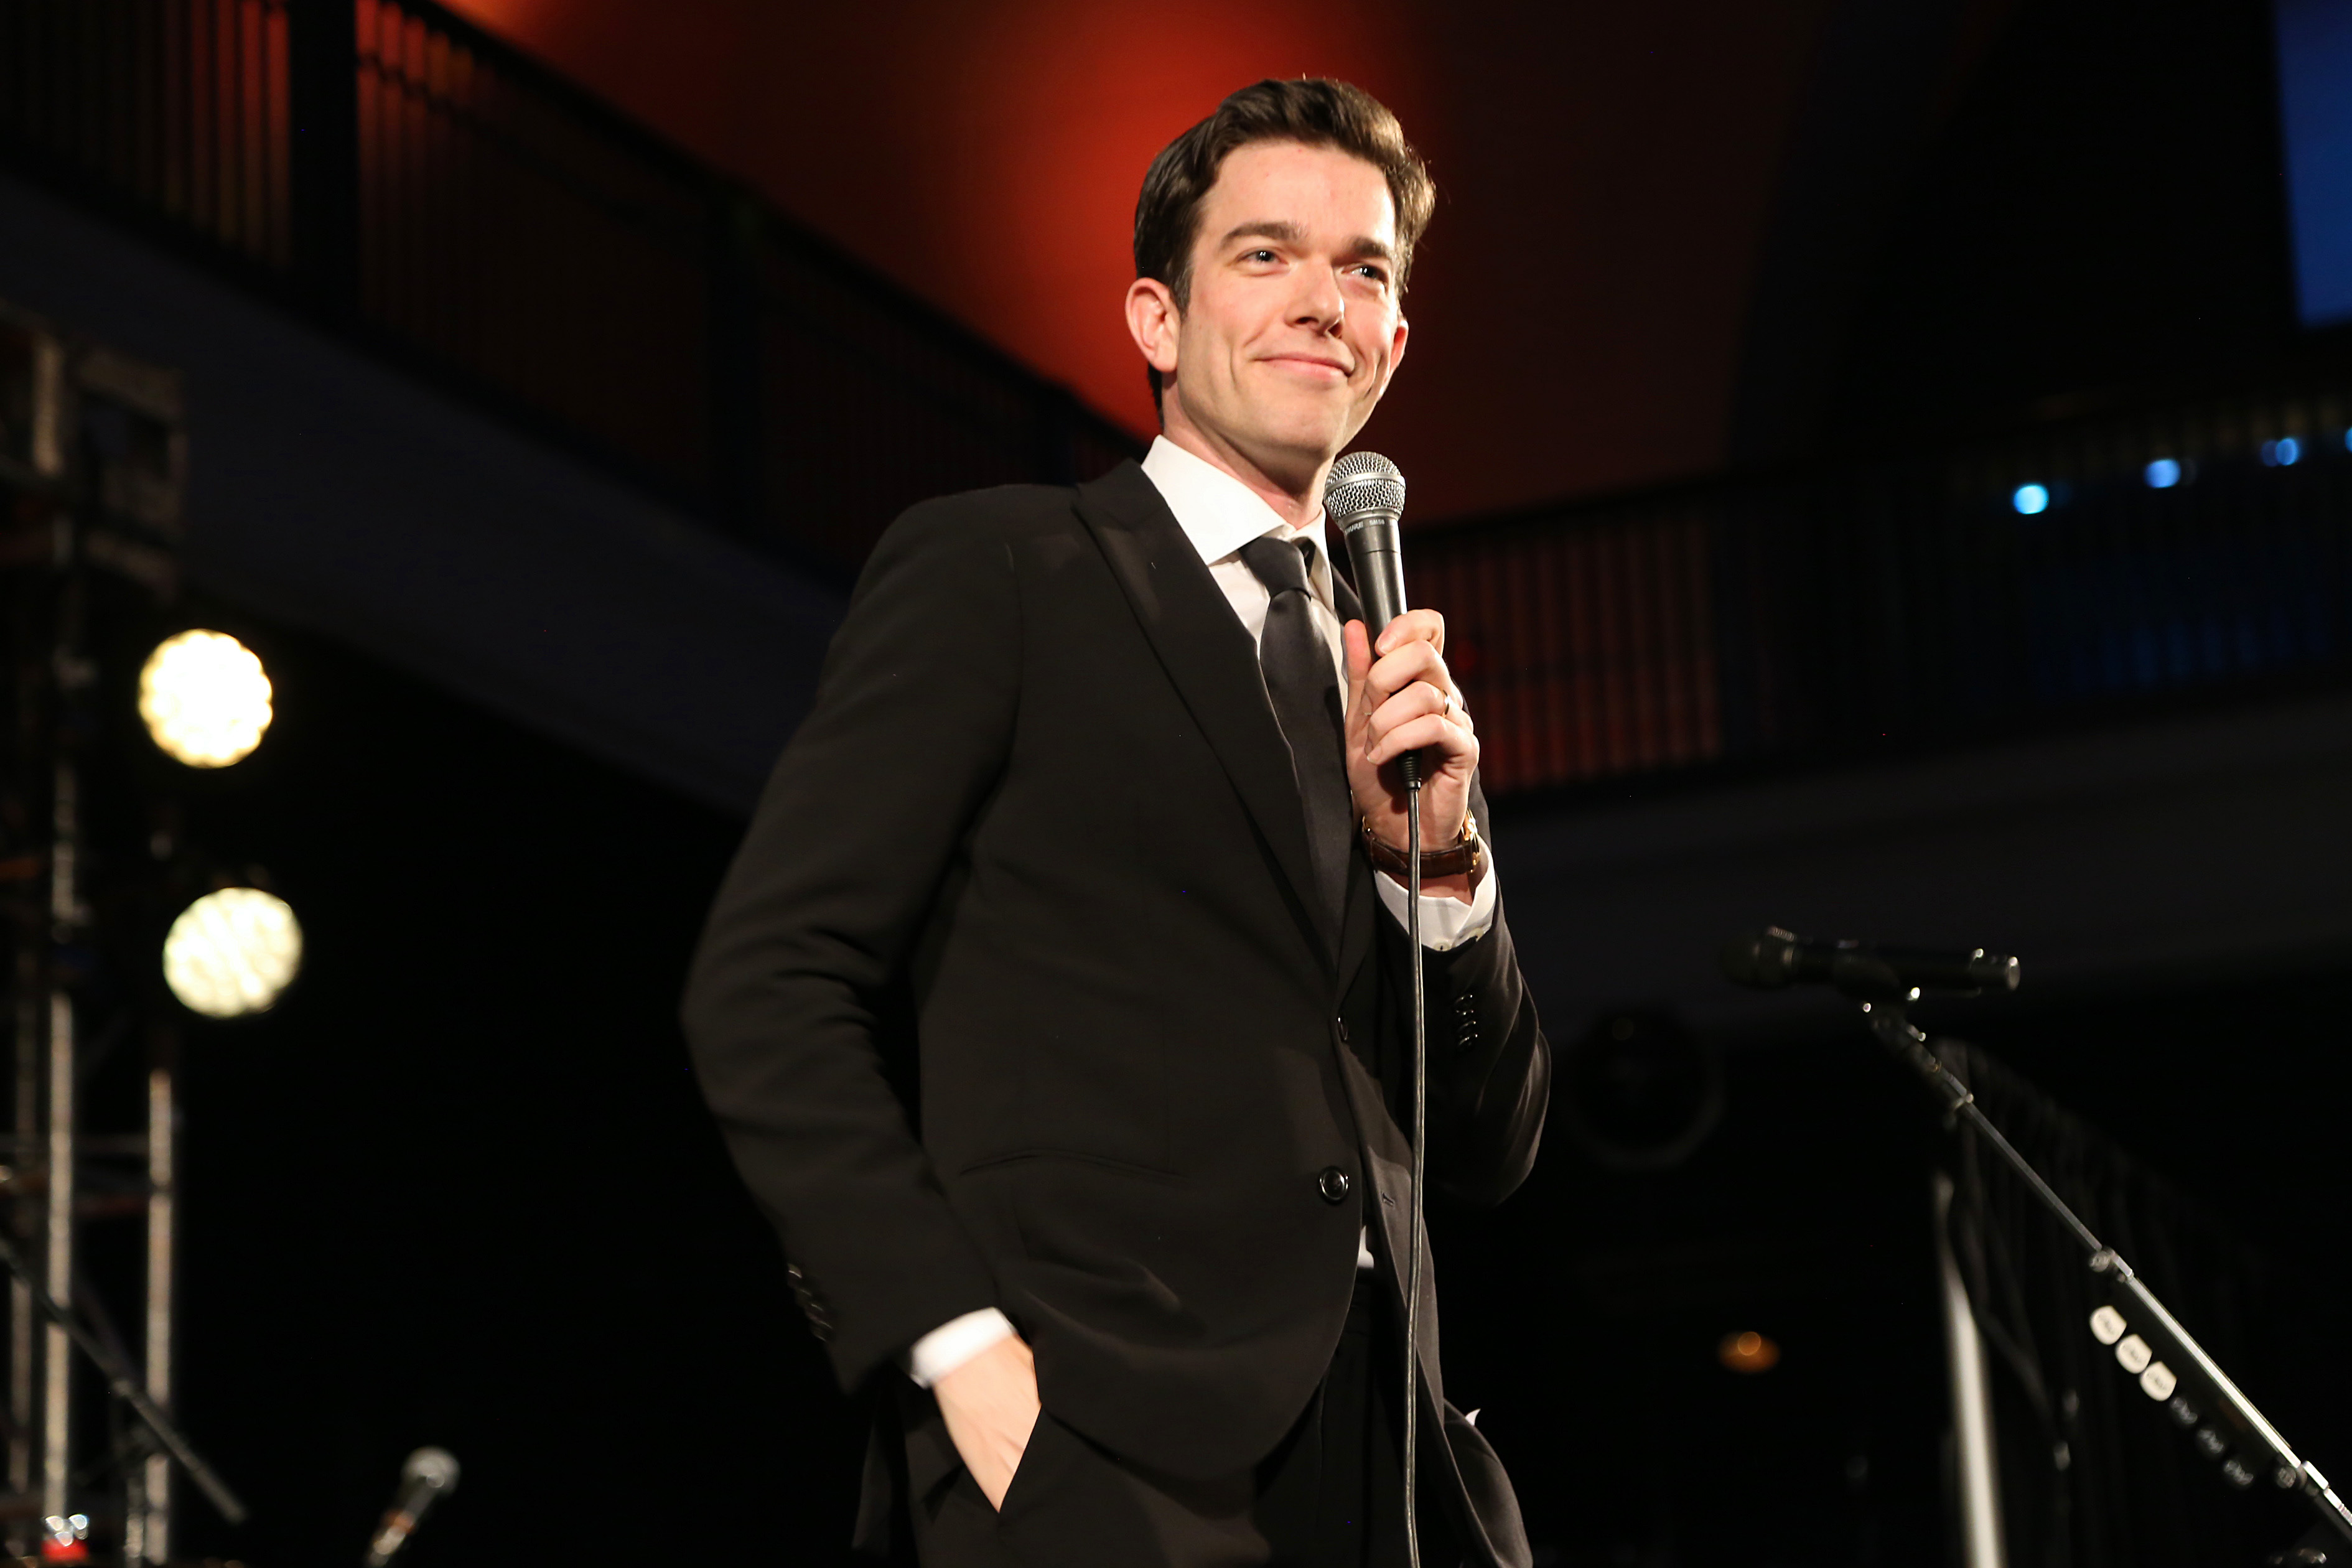 John Mulaney Just Took A Writing Job On Late Night With Seth Meyers - BroBible